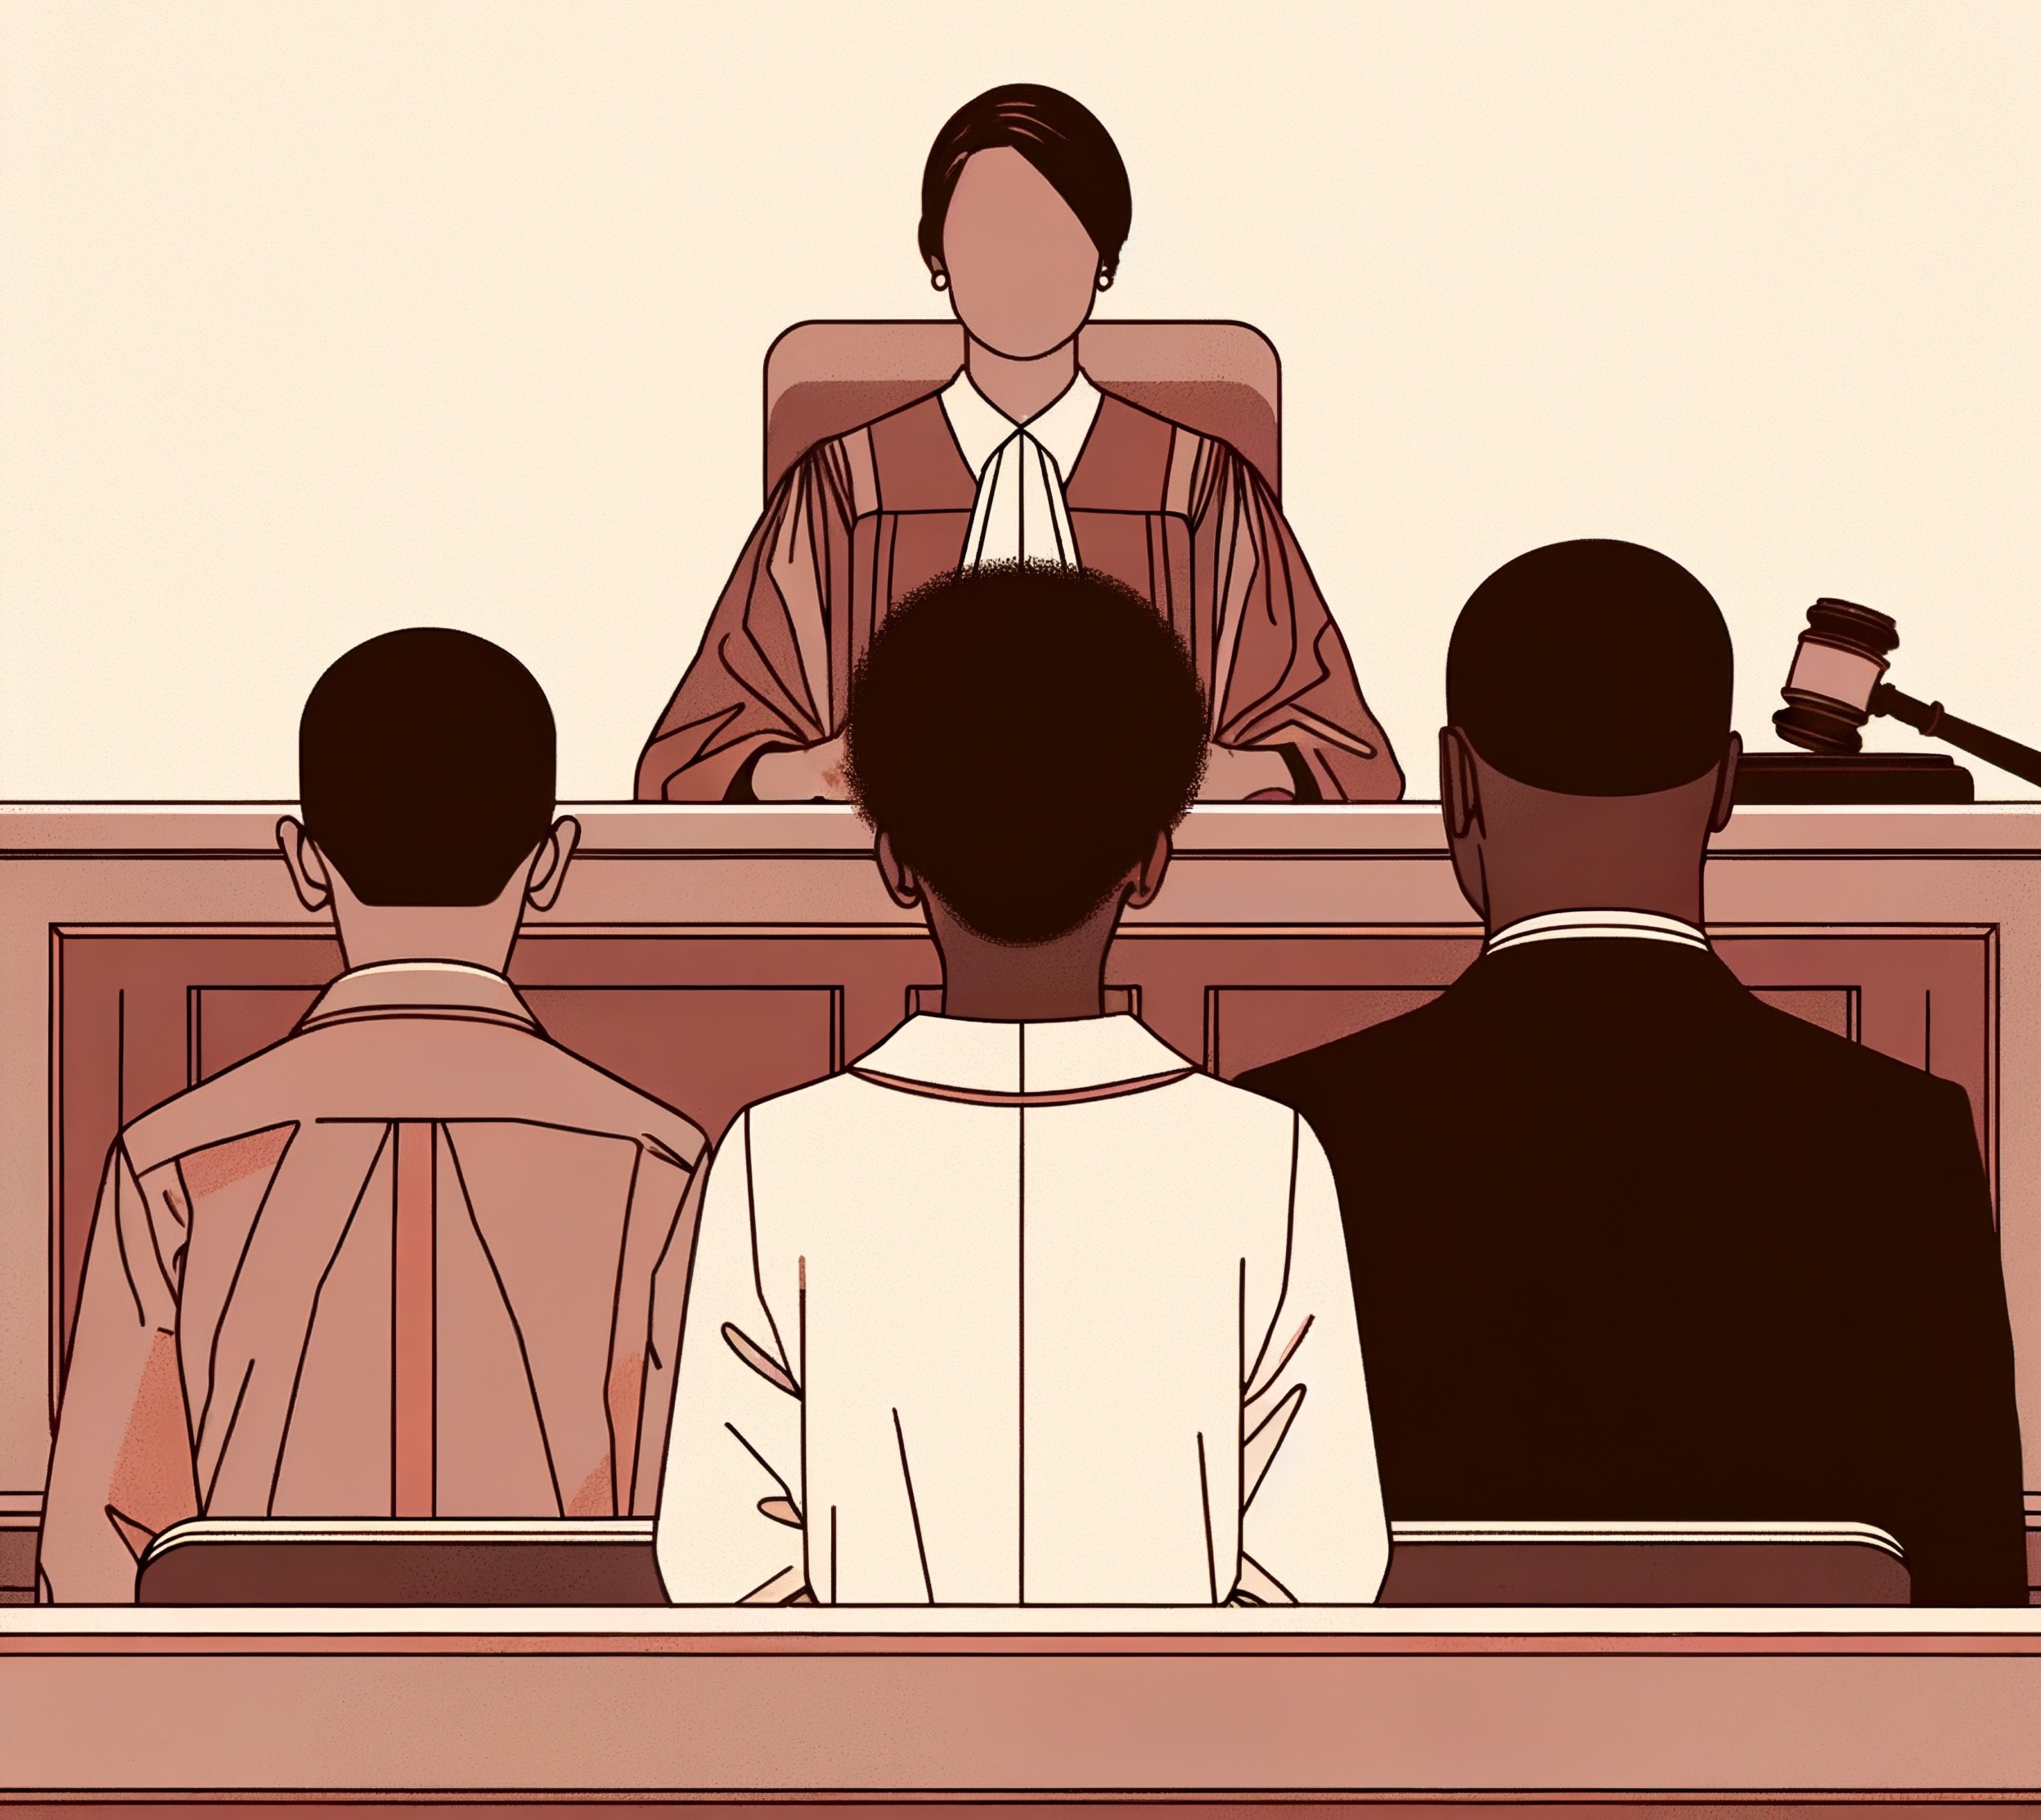 Juvenile Court defenders Ohio Illustration on tans and browns of female judge seated in courtroom facing black attorney and client both standing facing the judge